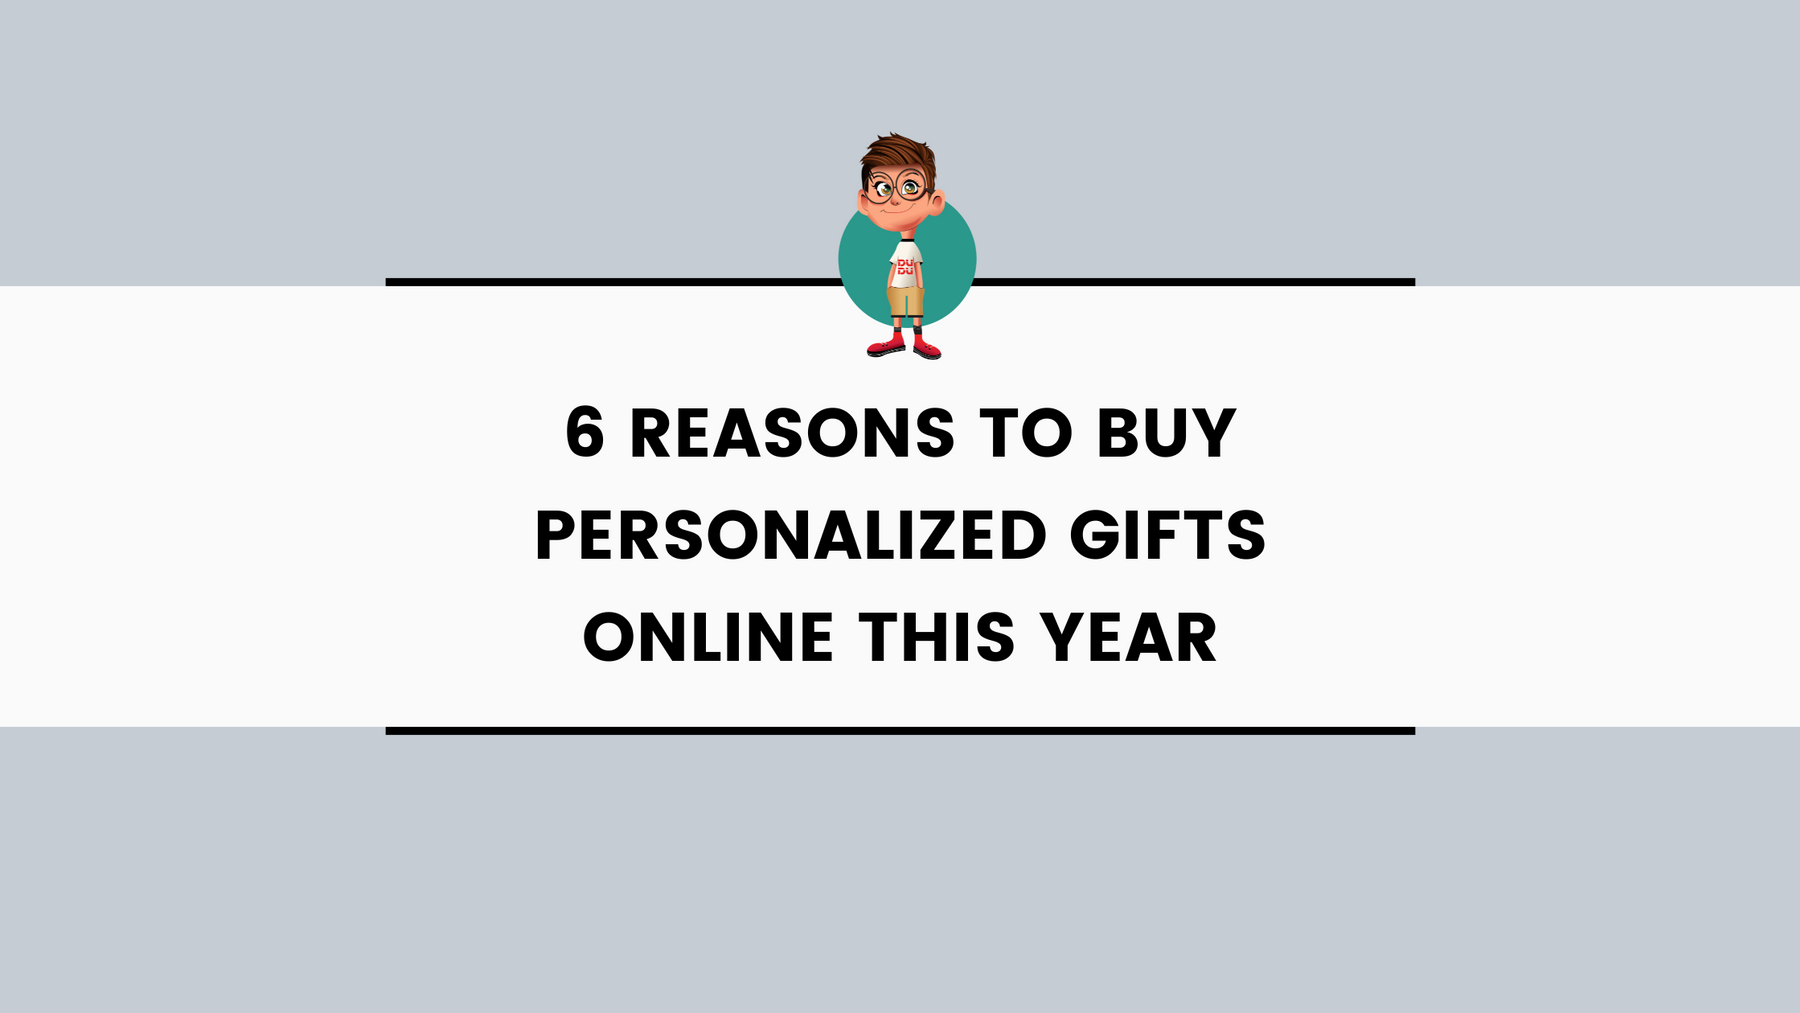 6 Reasons to Buy Personalized Gifts Online This Year